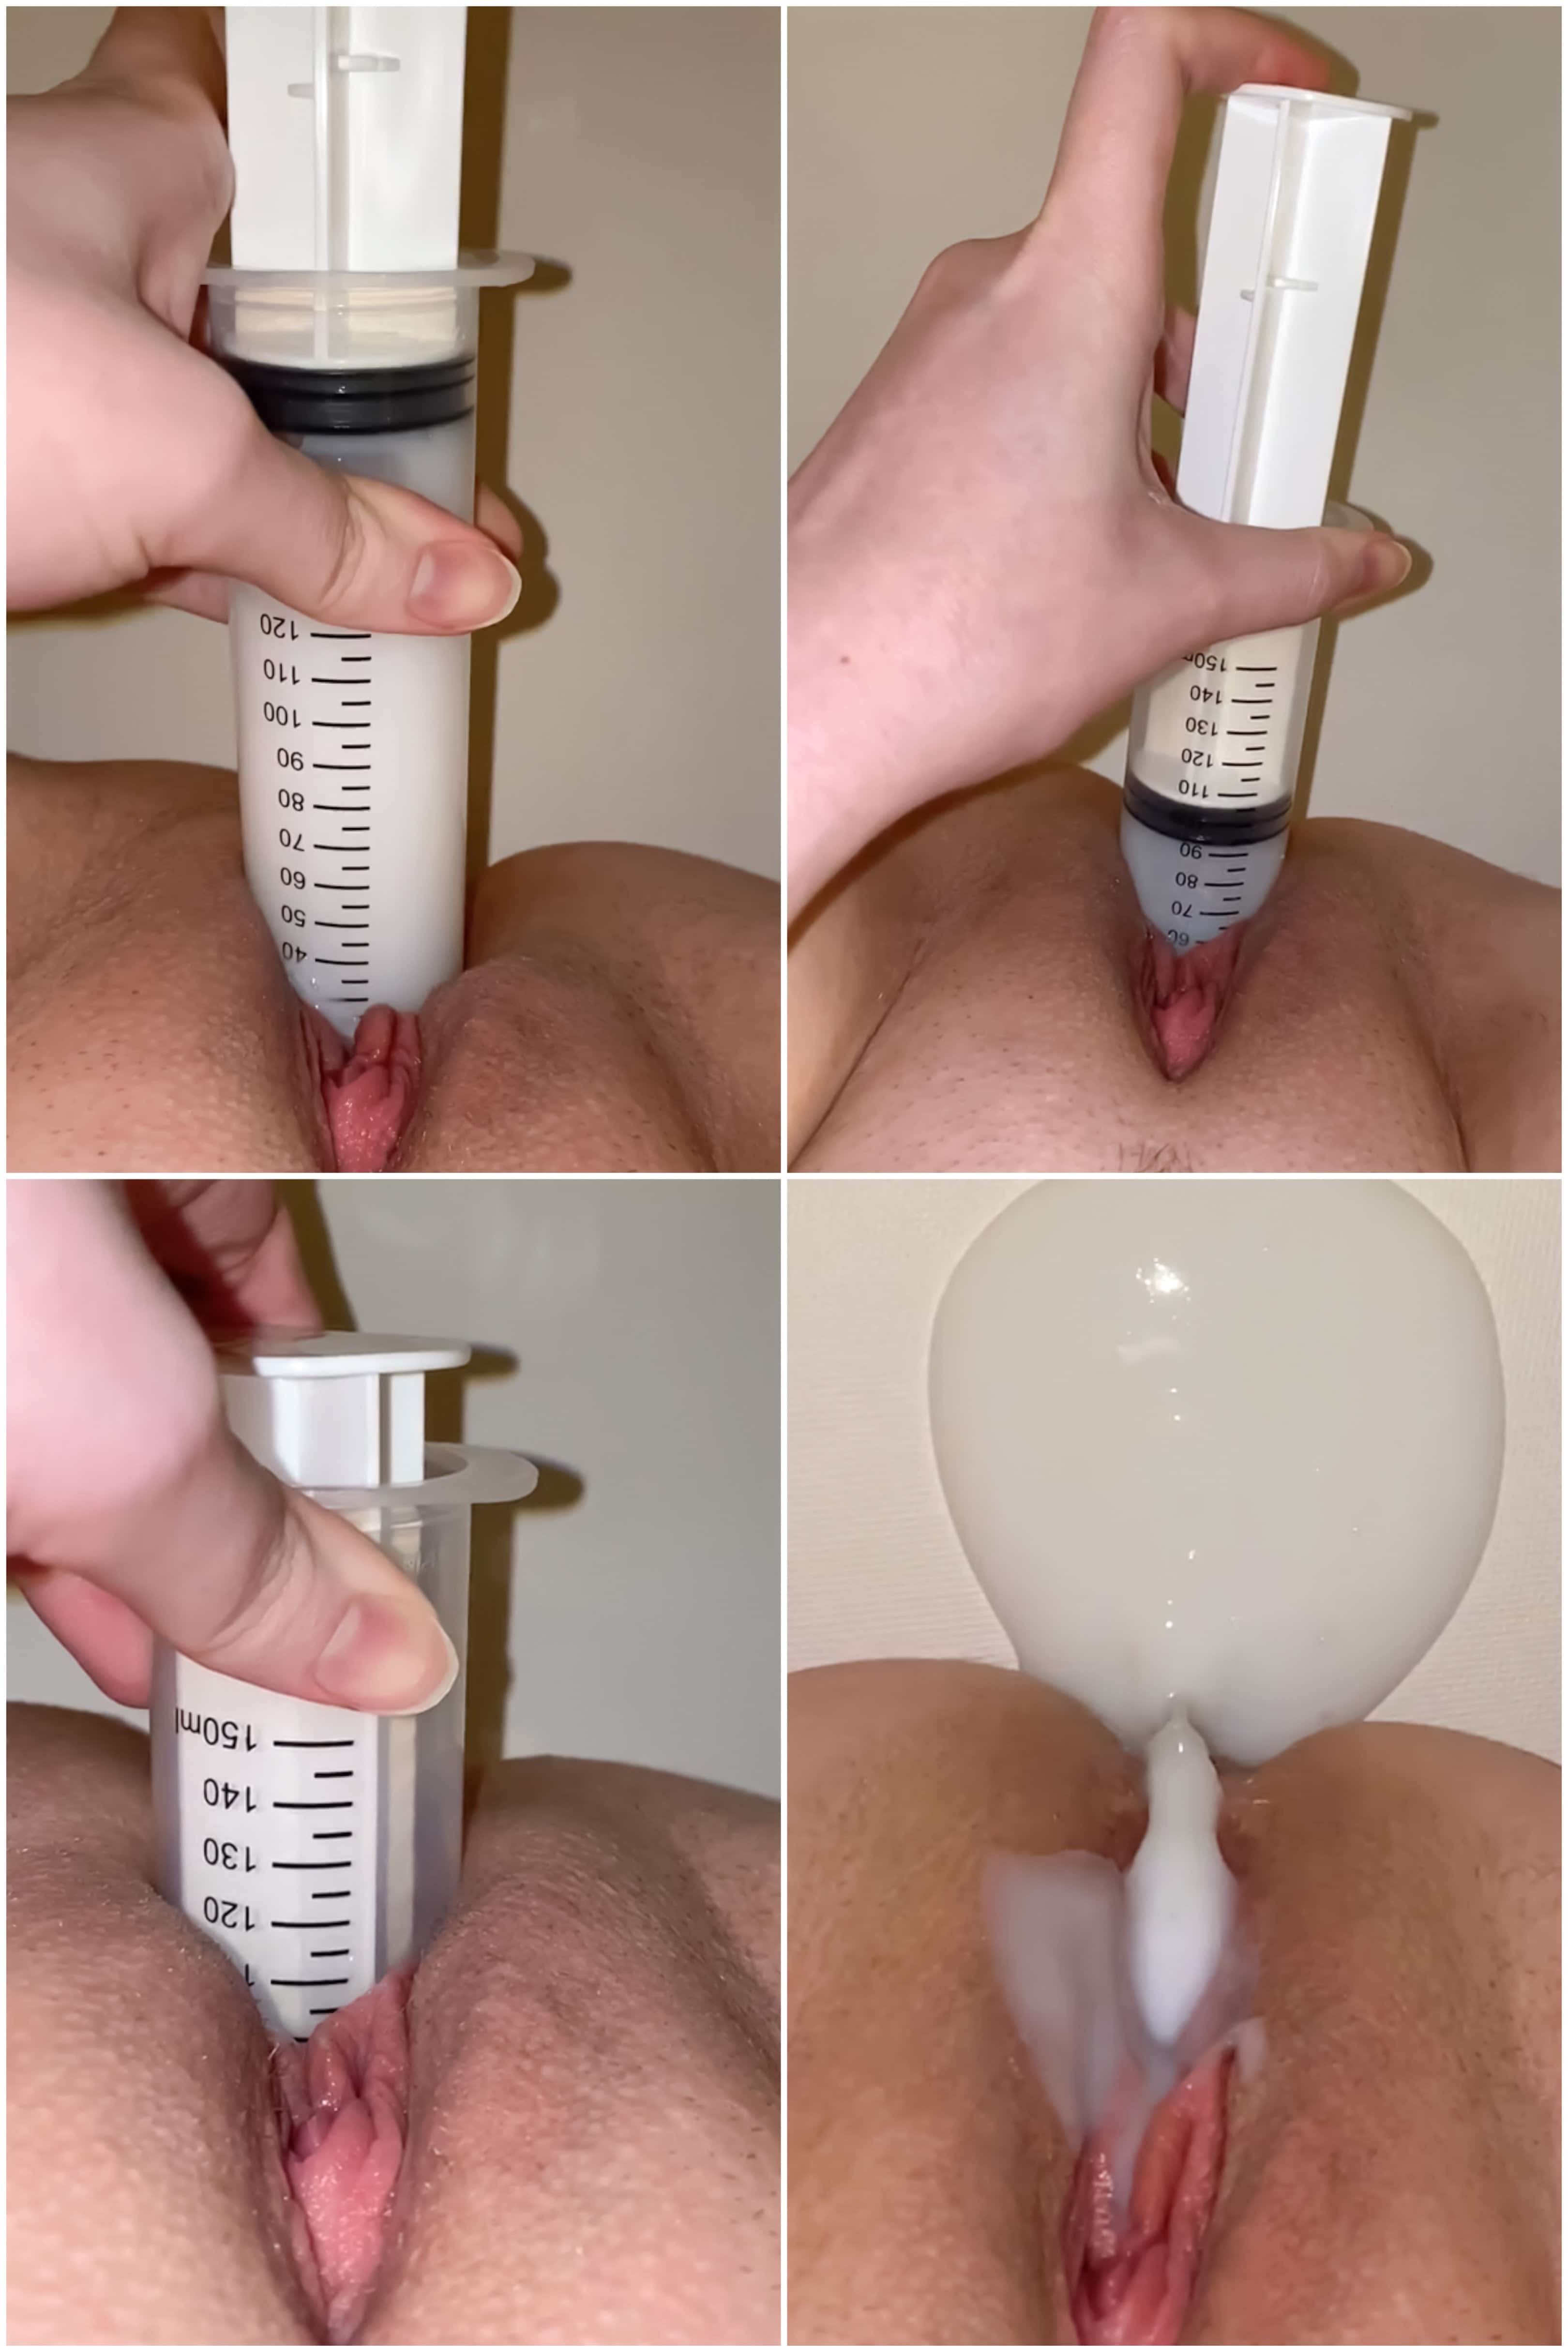 Artificial insemination with sperm as lubricant Sperm ice cubes pic photo